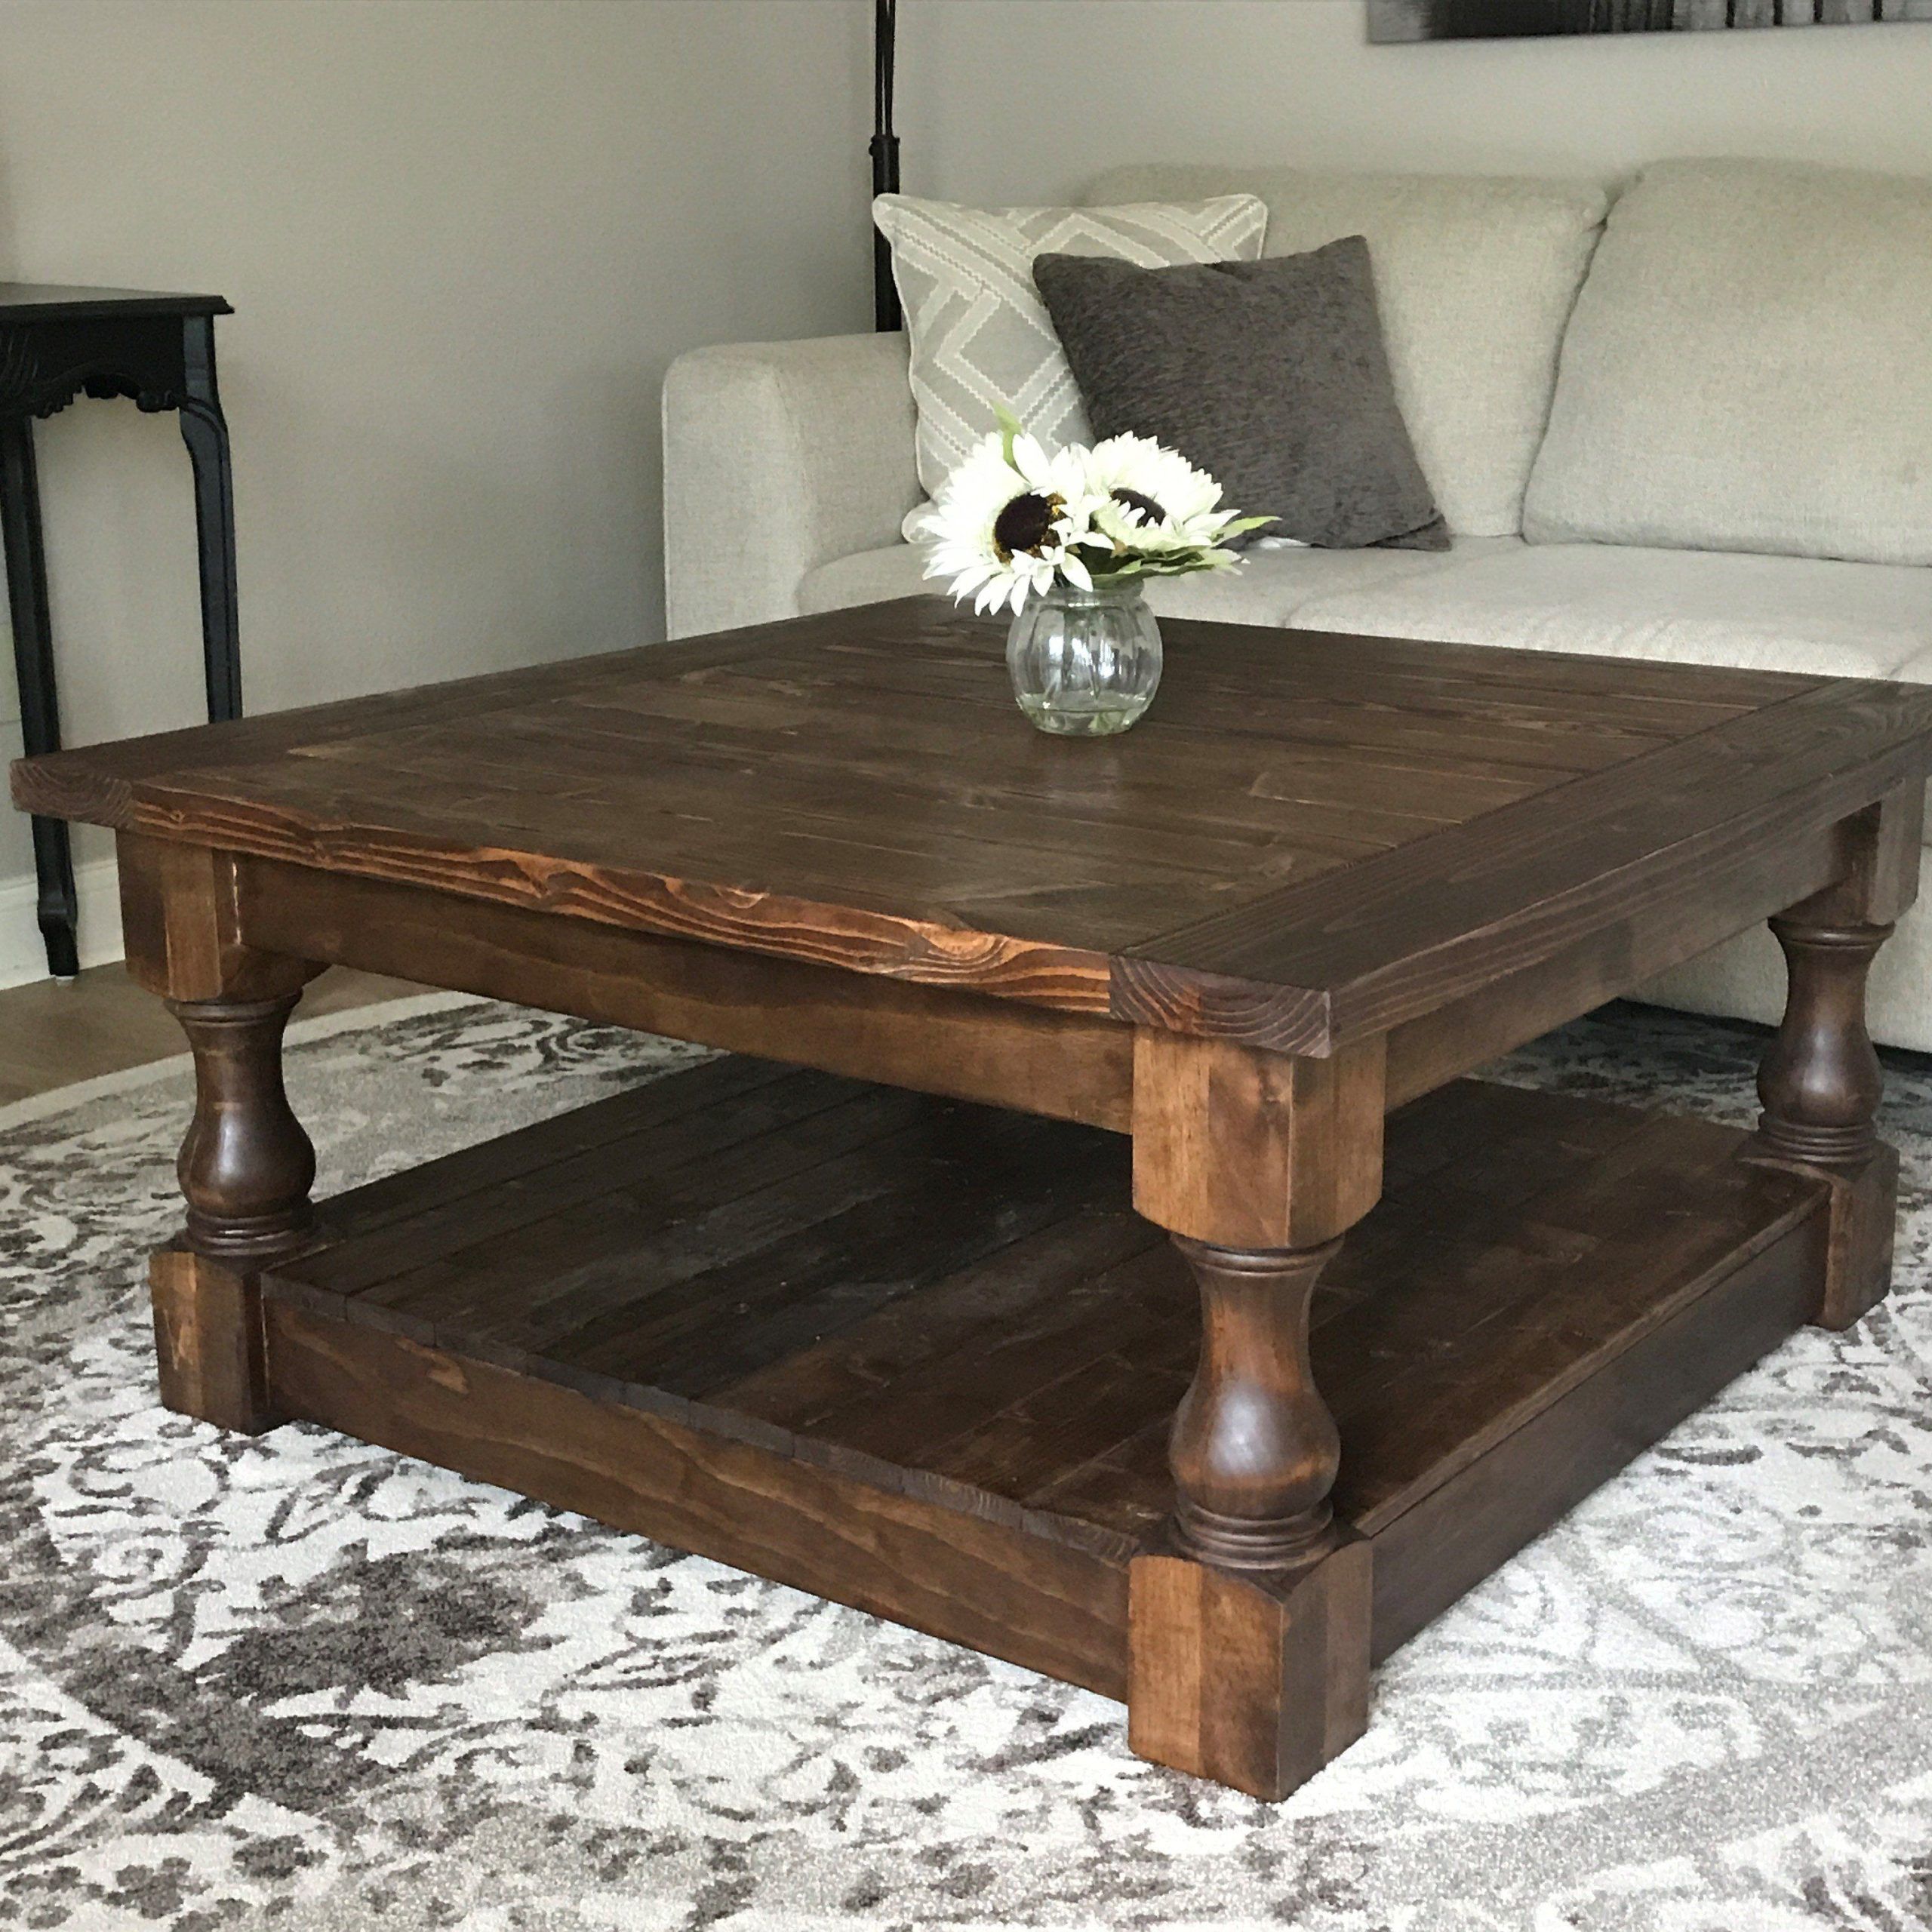 10+ Rustic Coffee Table Decor – Decoomo With Brown Rustic Coffee Tables (Gallery 11 of 20)